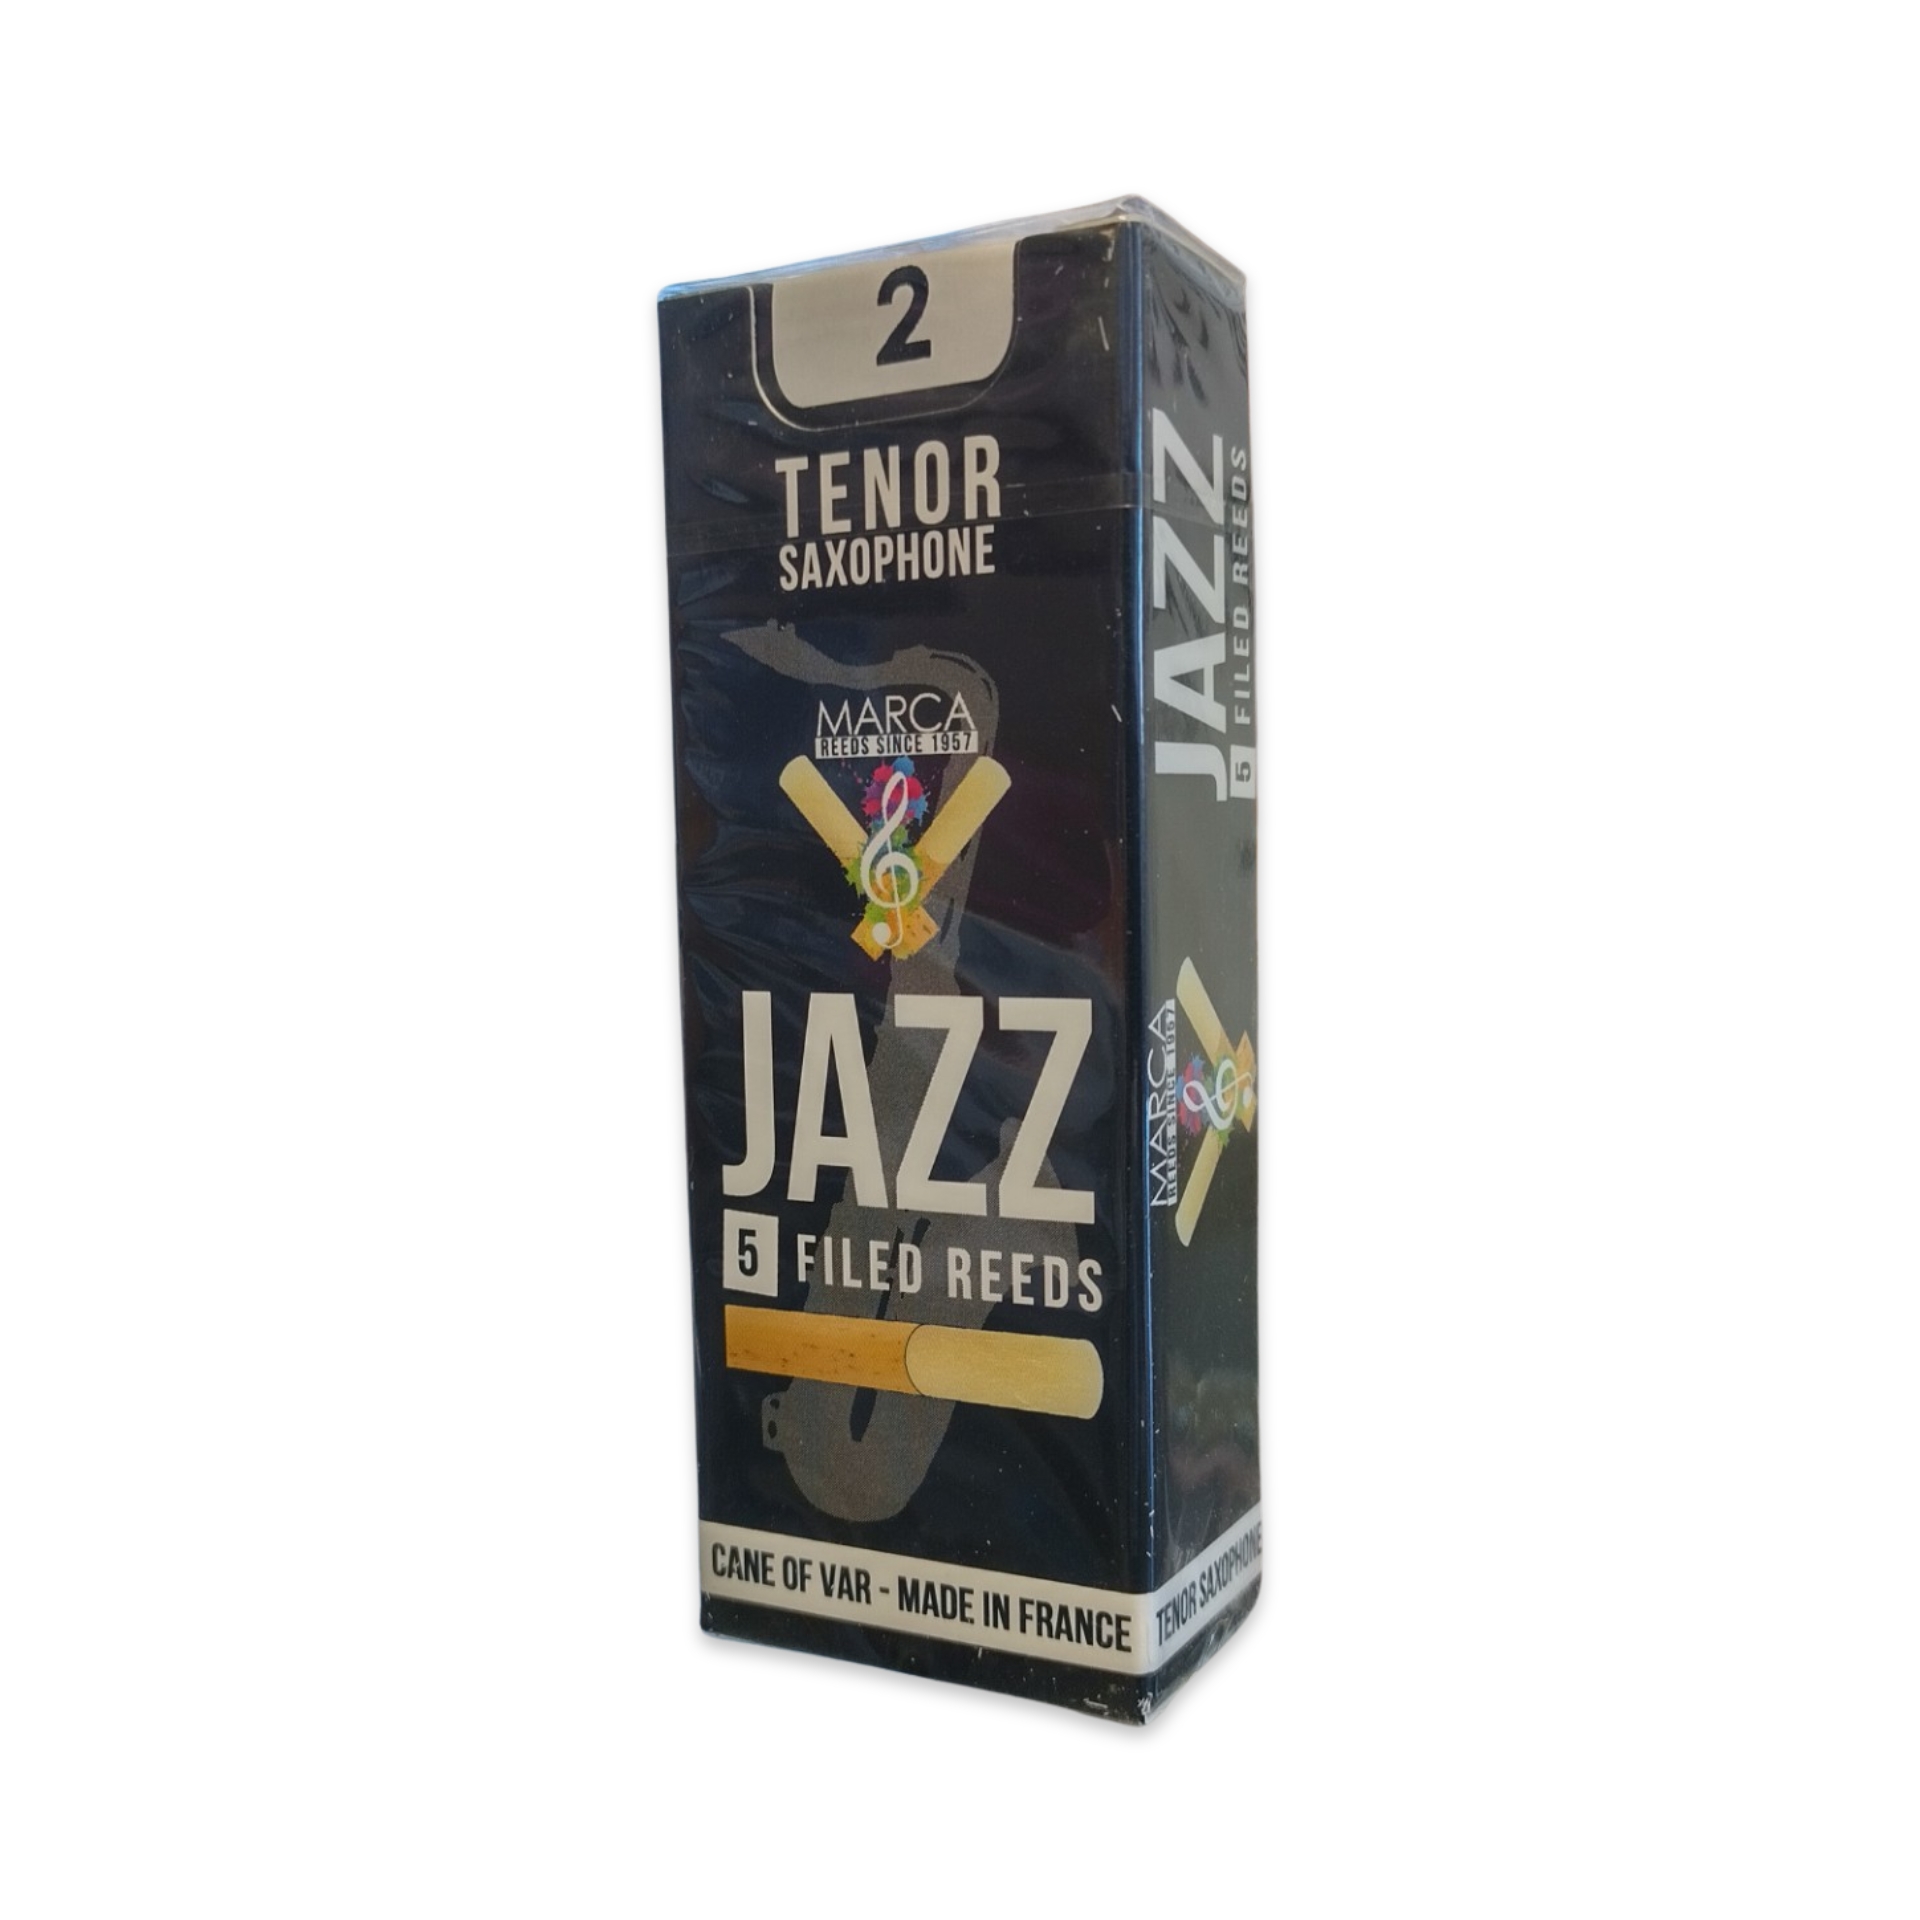 Marca Jazz Bb Tenor Saxophone Reeds - Strength 2 - Box of 5 Filed Reeds - JZ620 - Picture 1 of 1